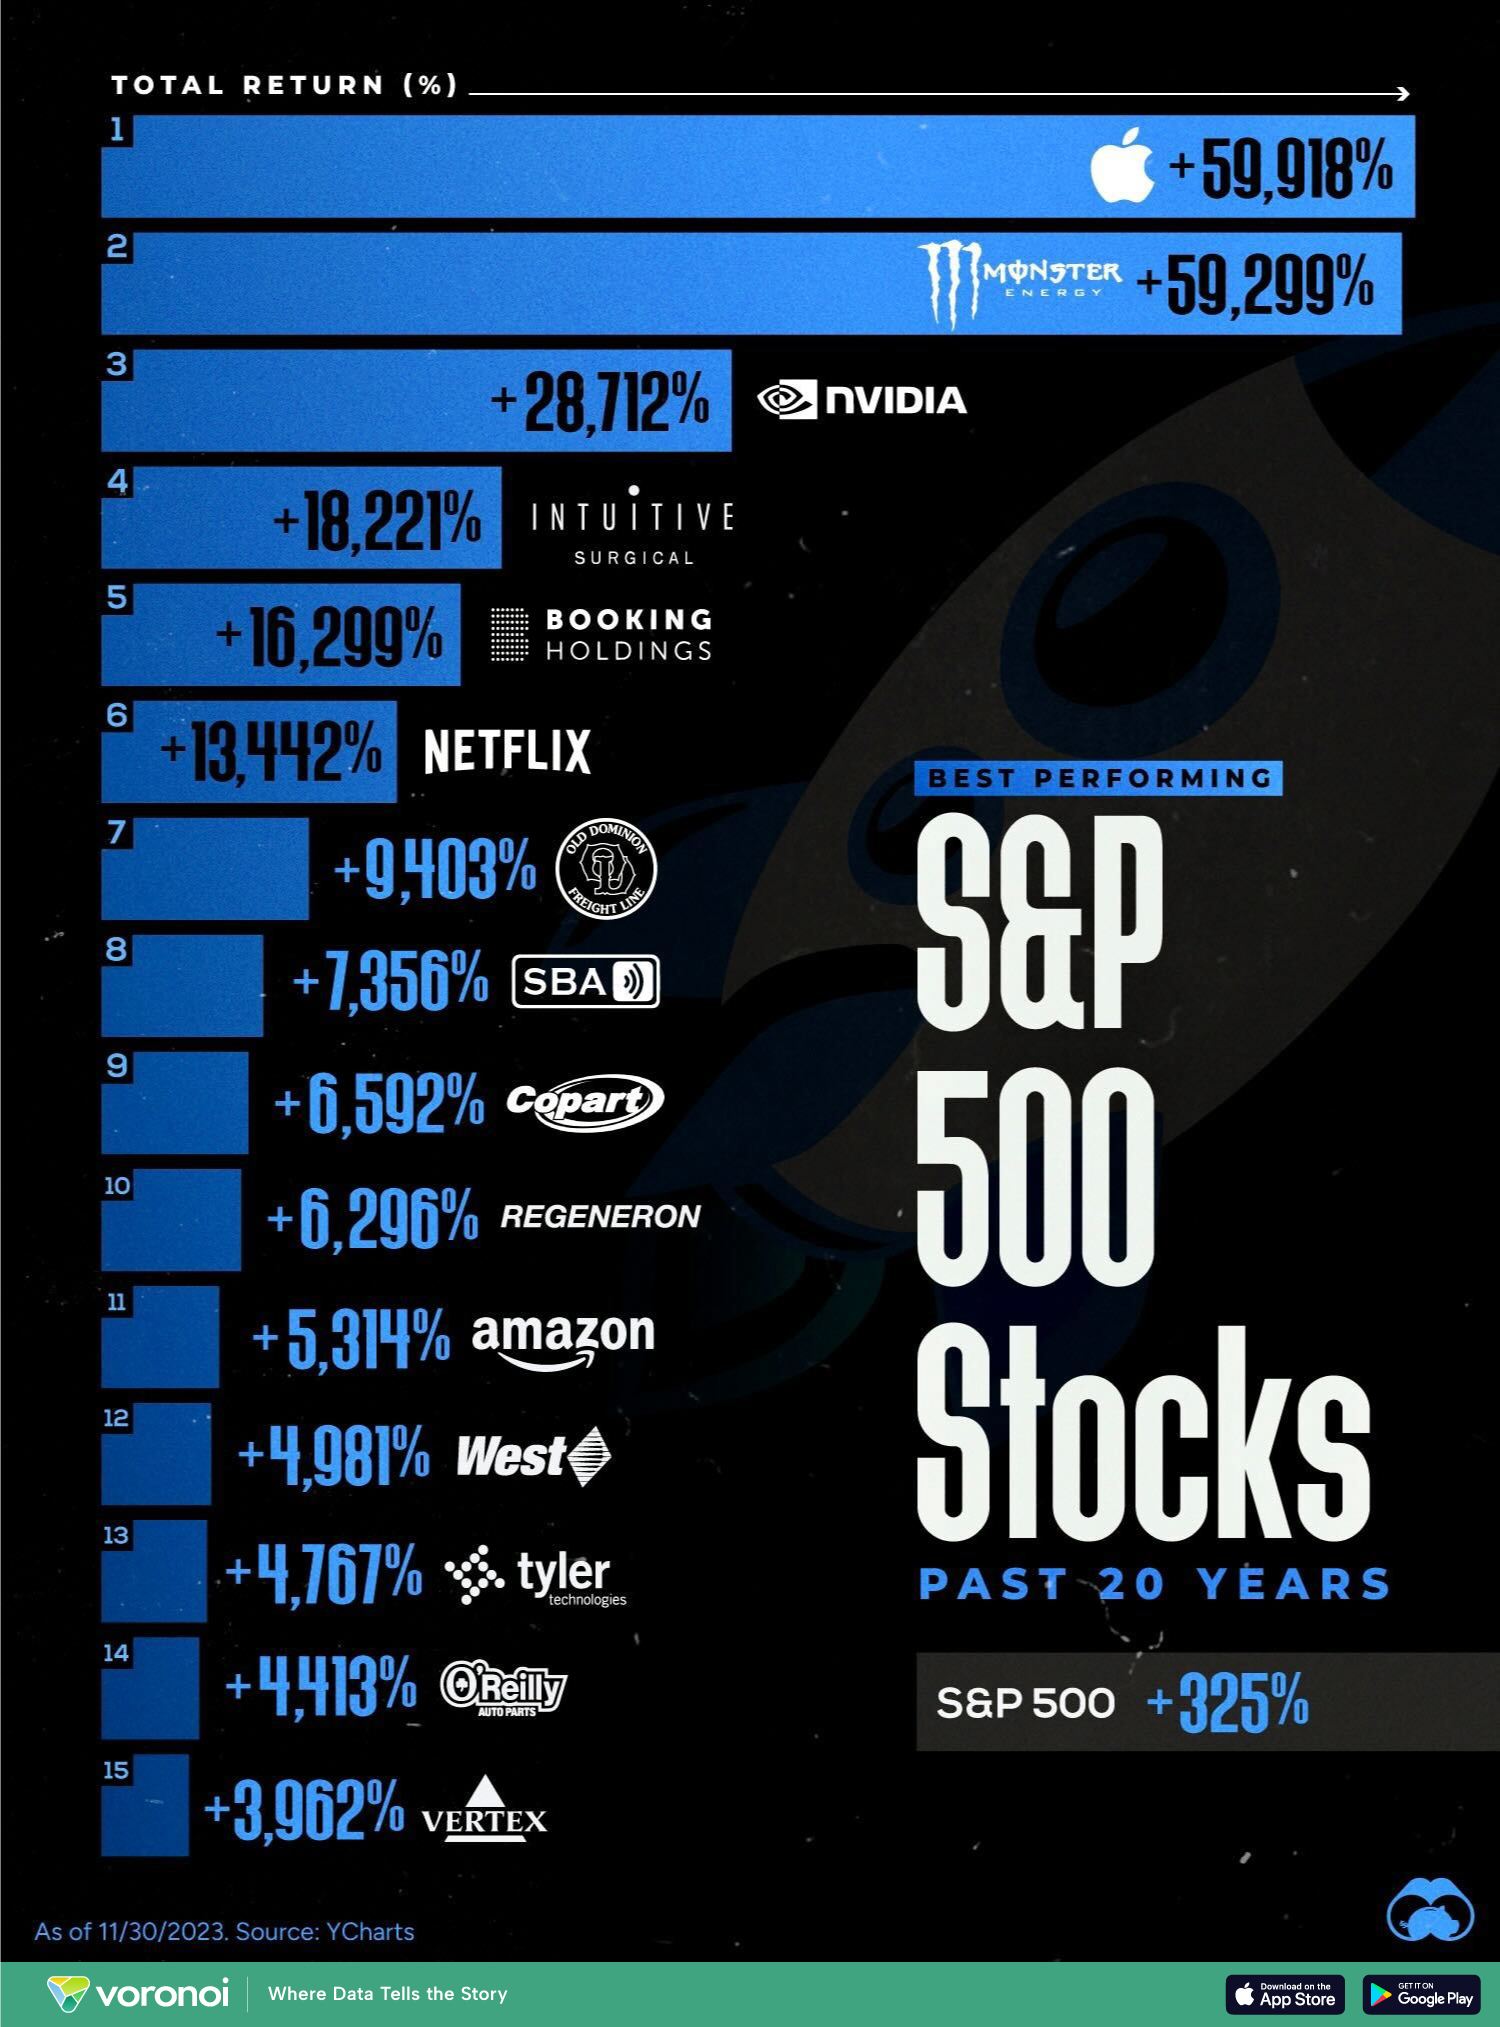 Top Performing S&P 500 Stocks Over 20 Years